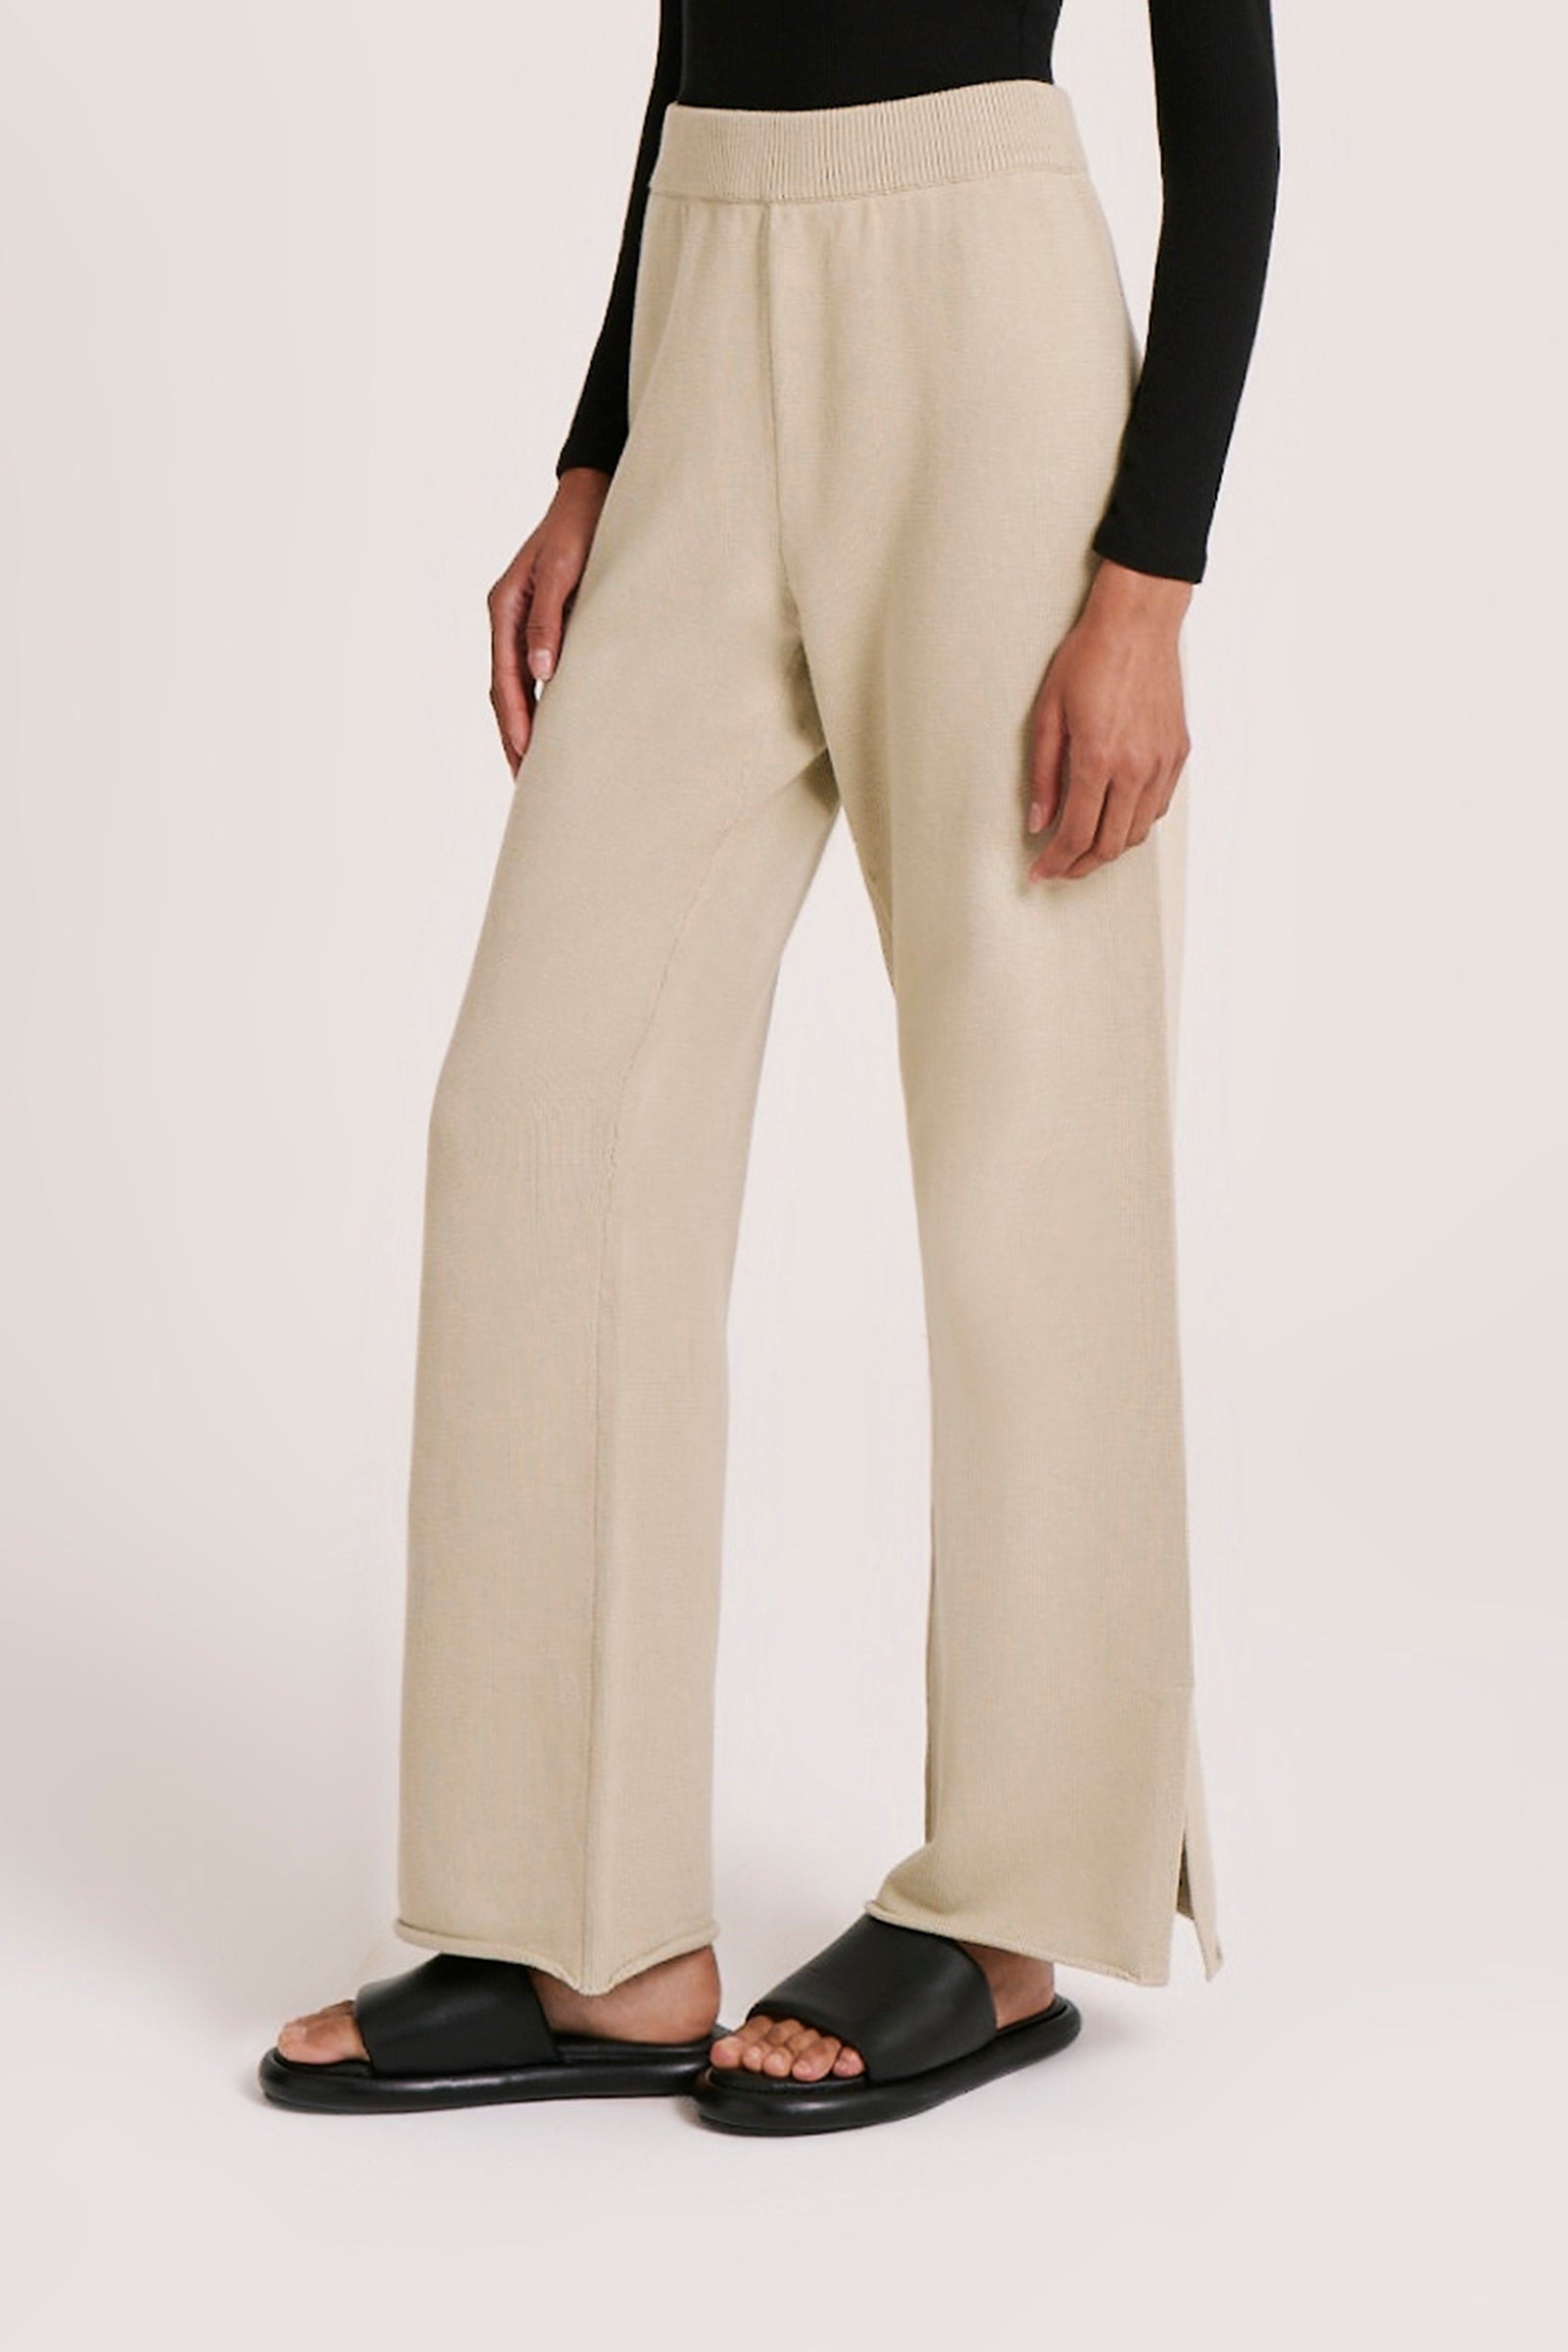 Nude Lucy | Lilou Knit Pant - Cucumber